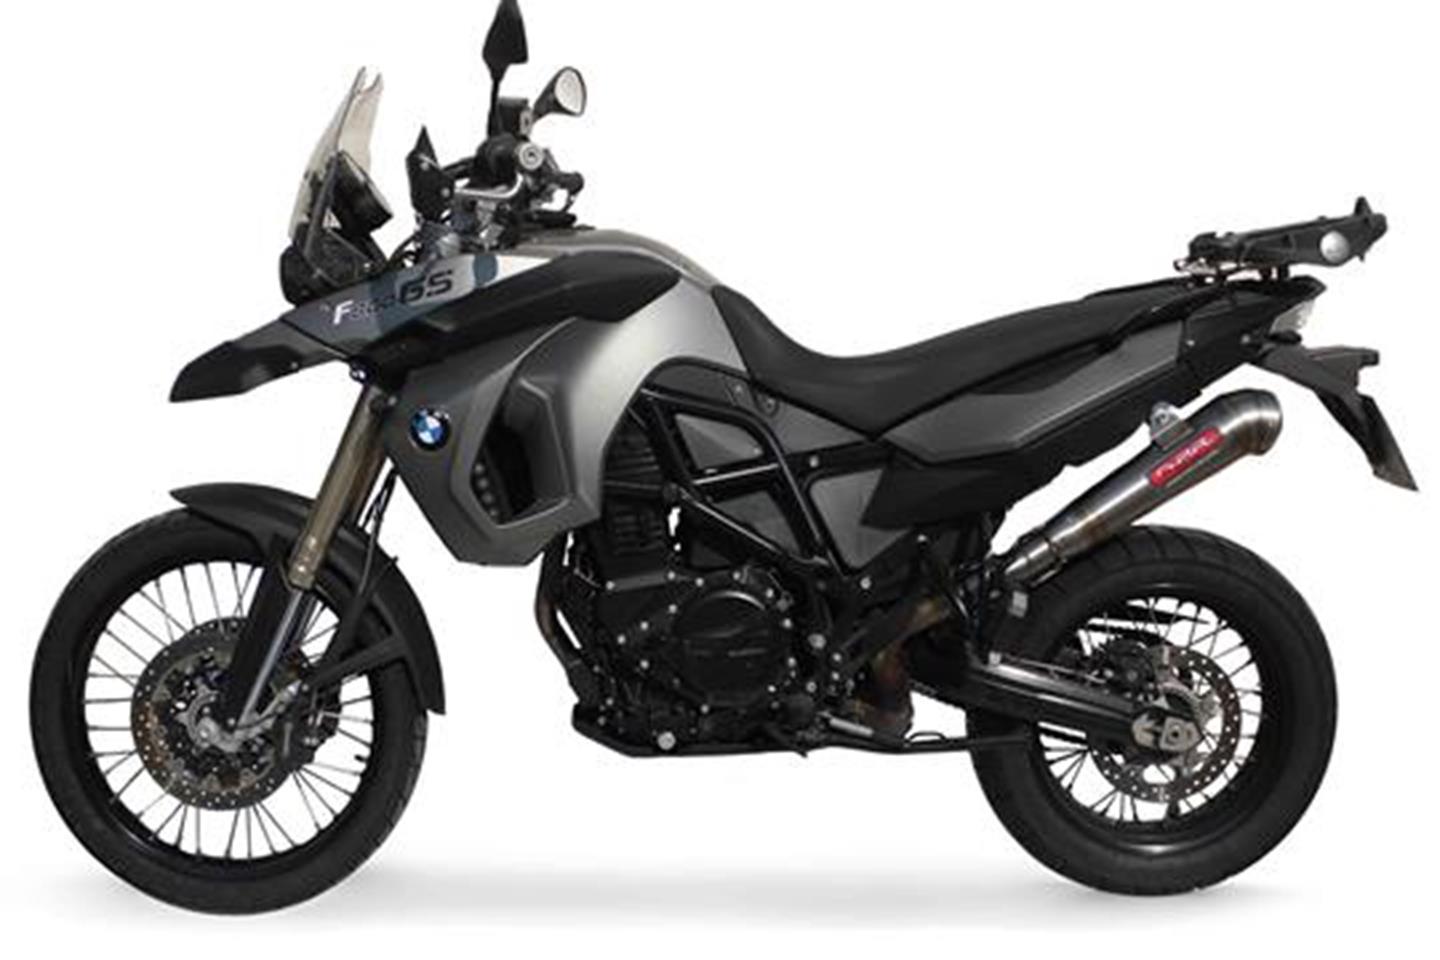 BMW F 800 GS (2008-2018) Review | Owner & Expert Ratings